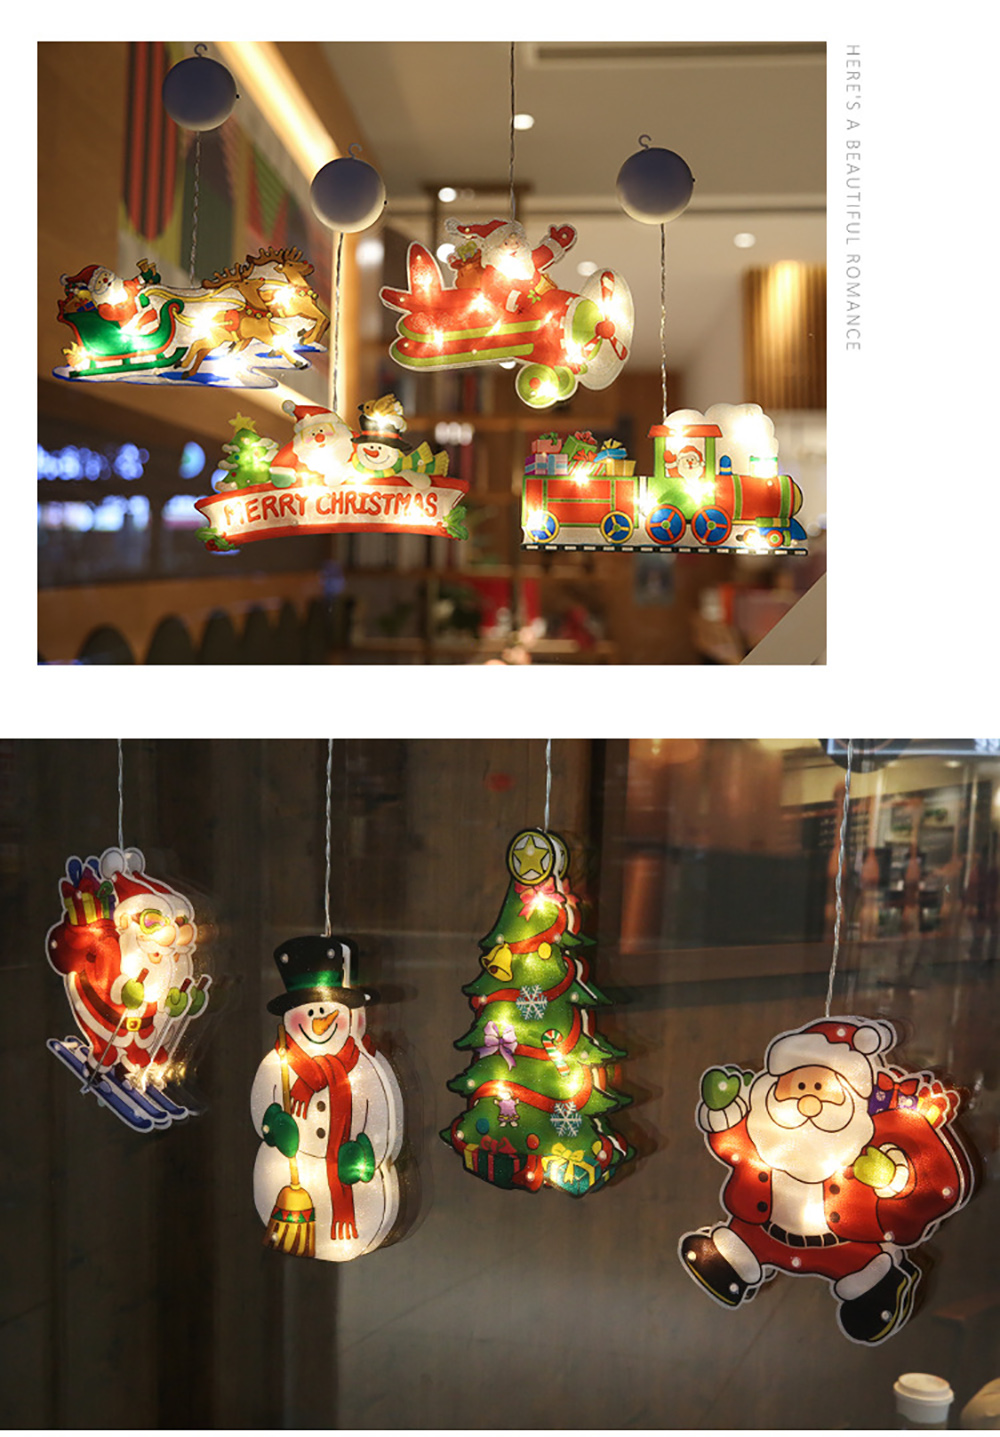 Santa-Claus-Led-Suction-Cup-Window-Hanging-LED-Lights-for-Christmas-Decoration-Holiday-Festive-1911213-6